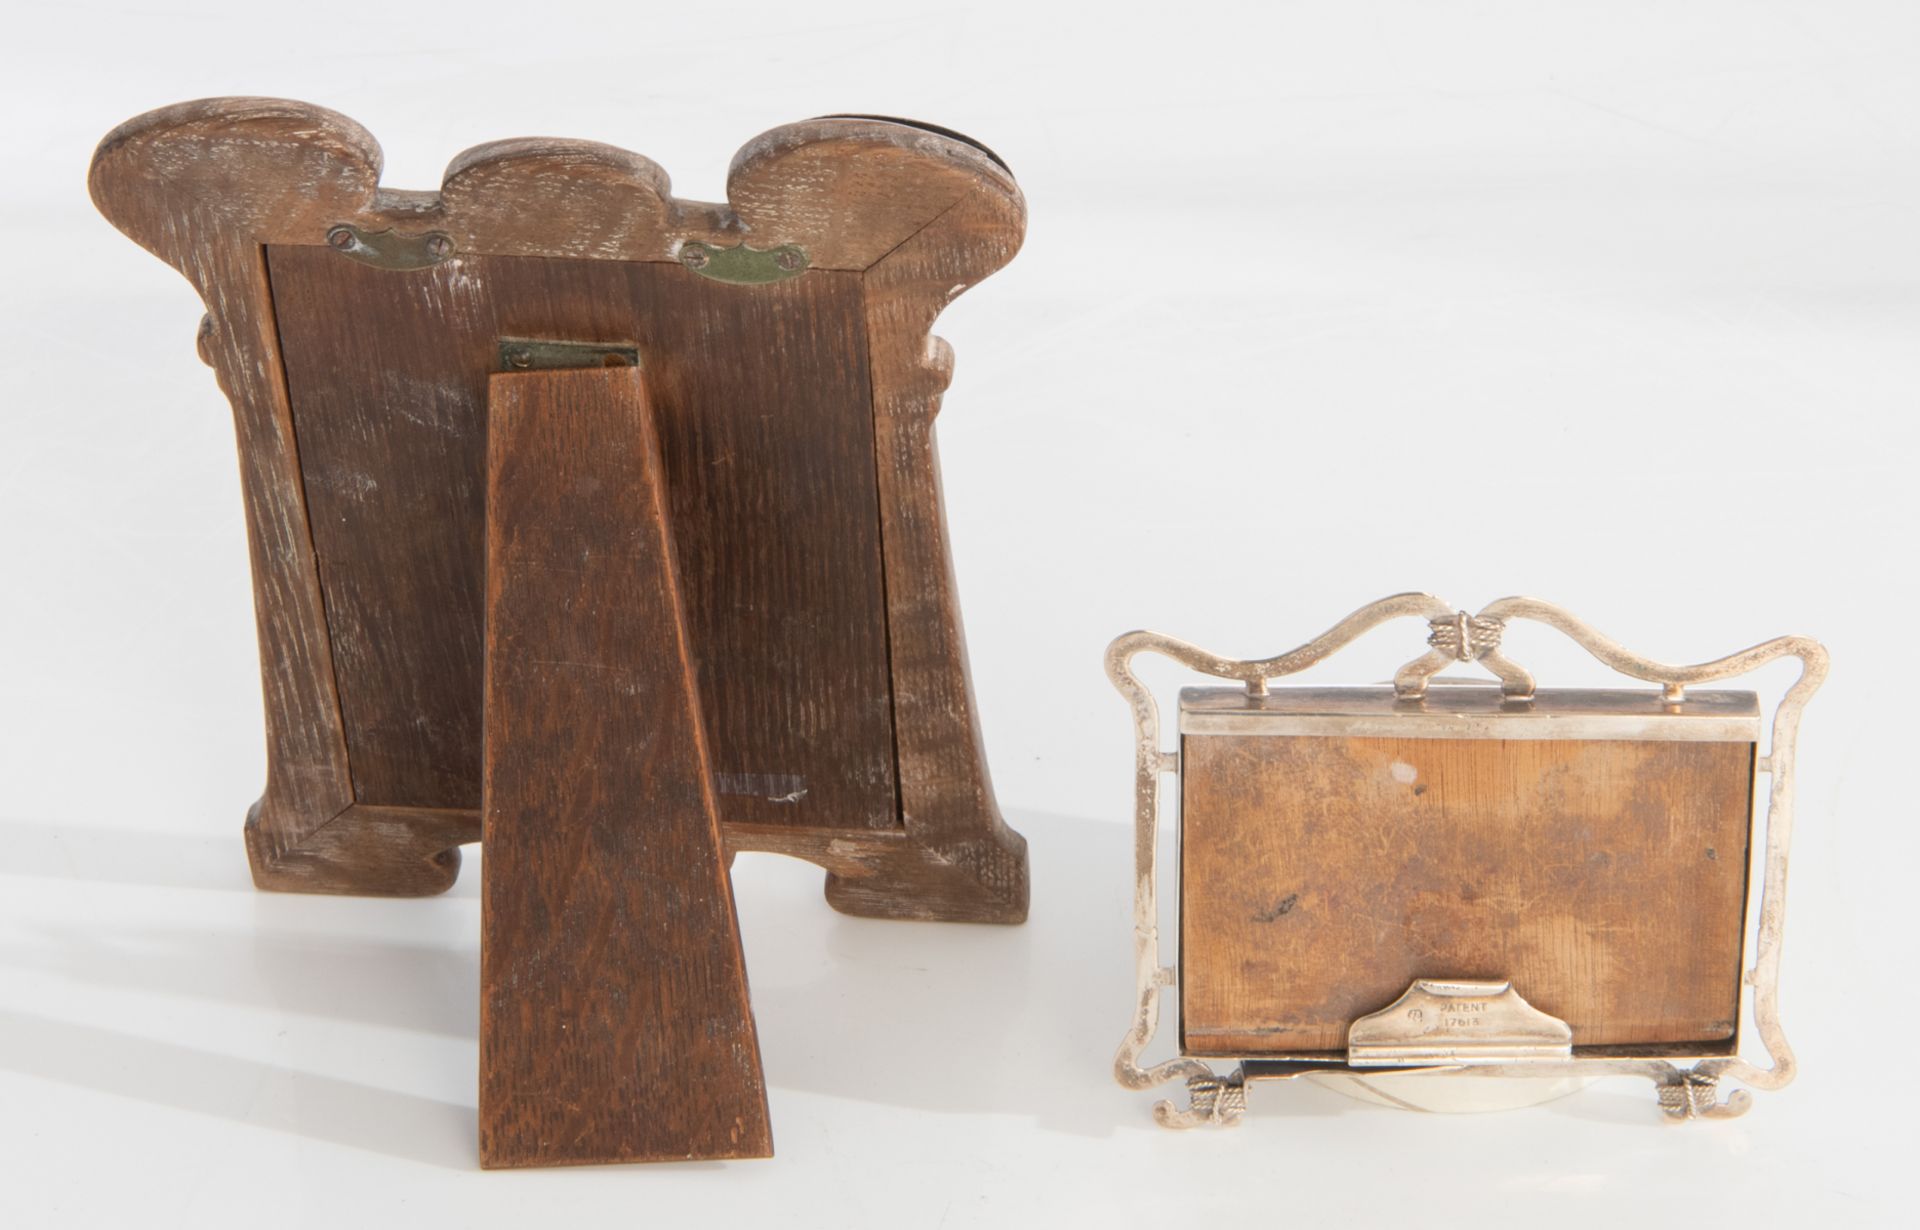 A varied lot of 19th and 20thC, mostly English silver gadgets, photo frames, and tablewares - Image 17 of 33